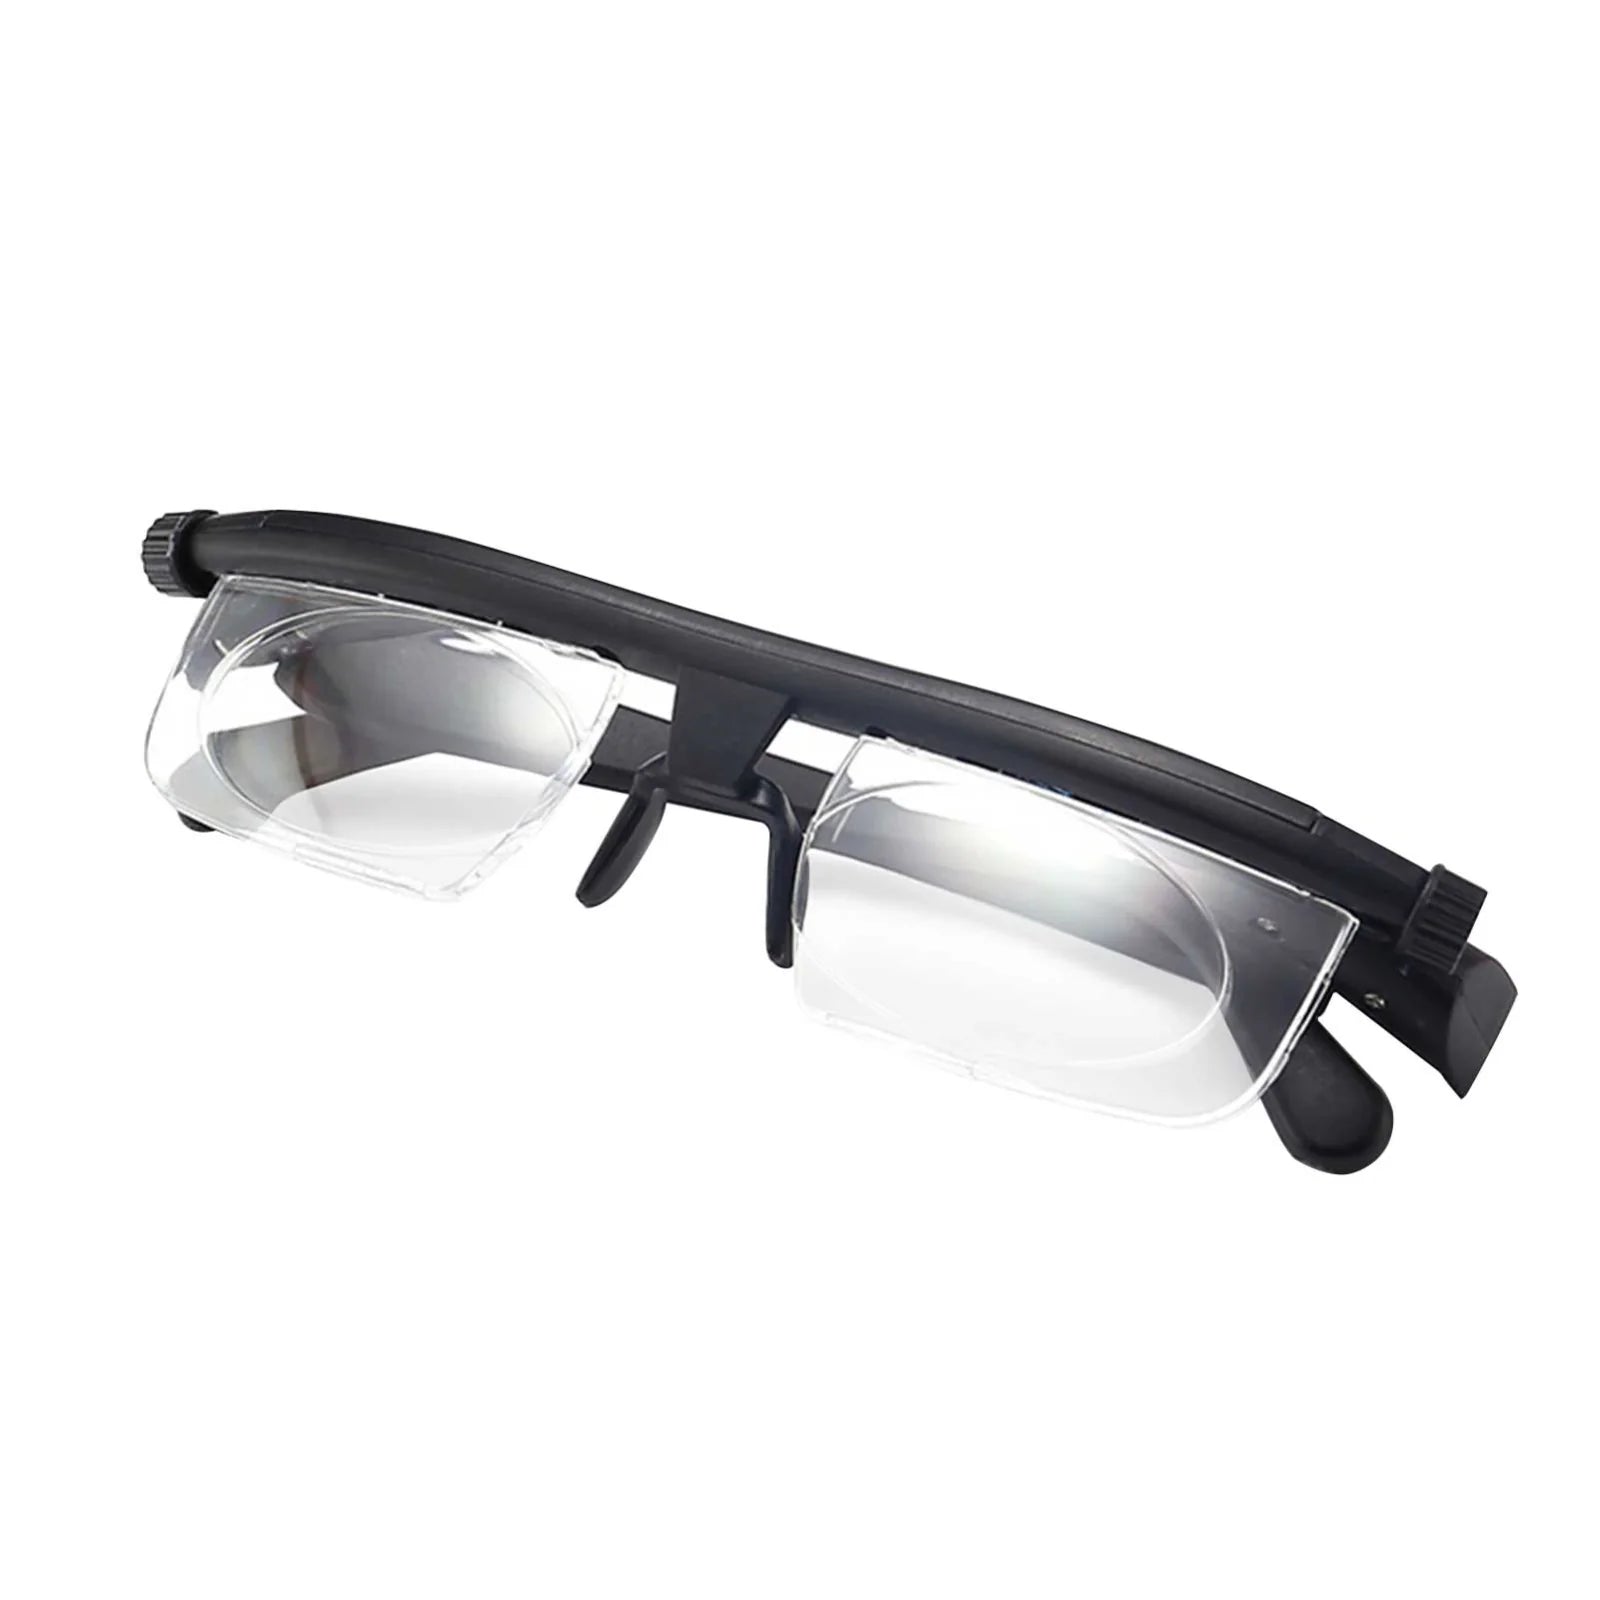 VisionMaster Dial Adjustable Glasses: Variable Focus Eyewear for Any Distance - Adjustable eye glasses Readi Gear